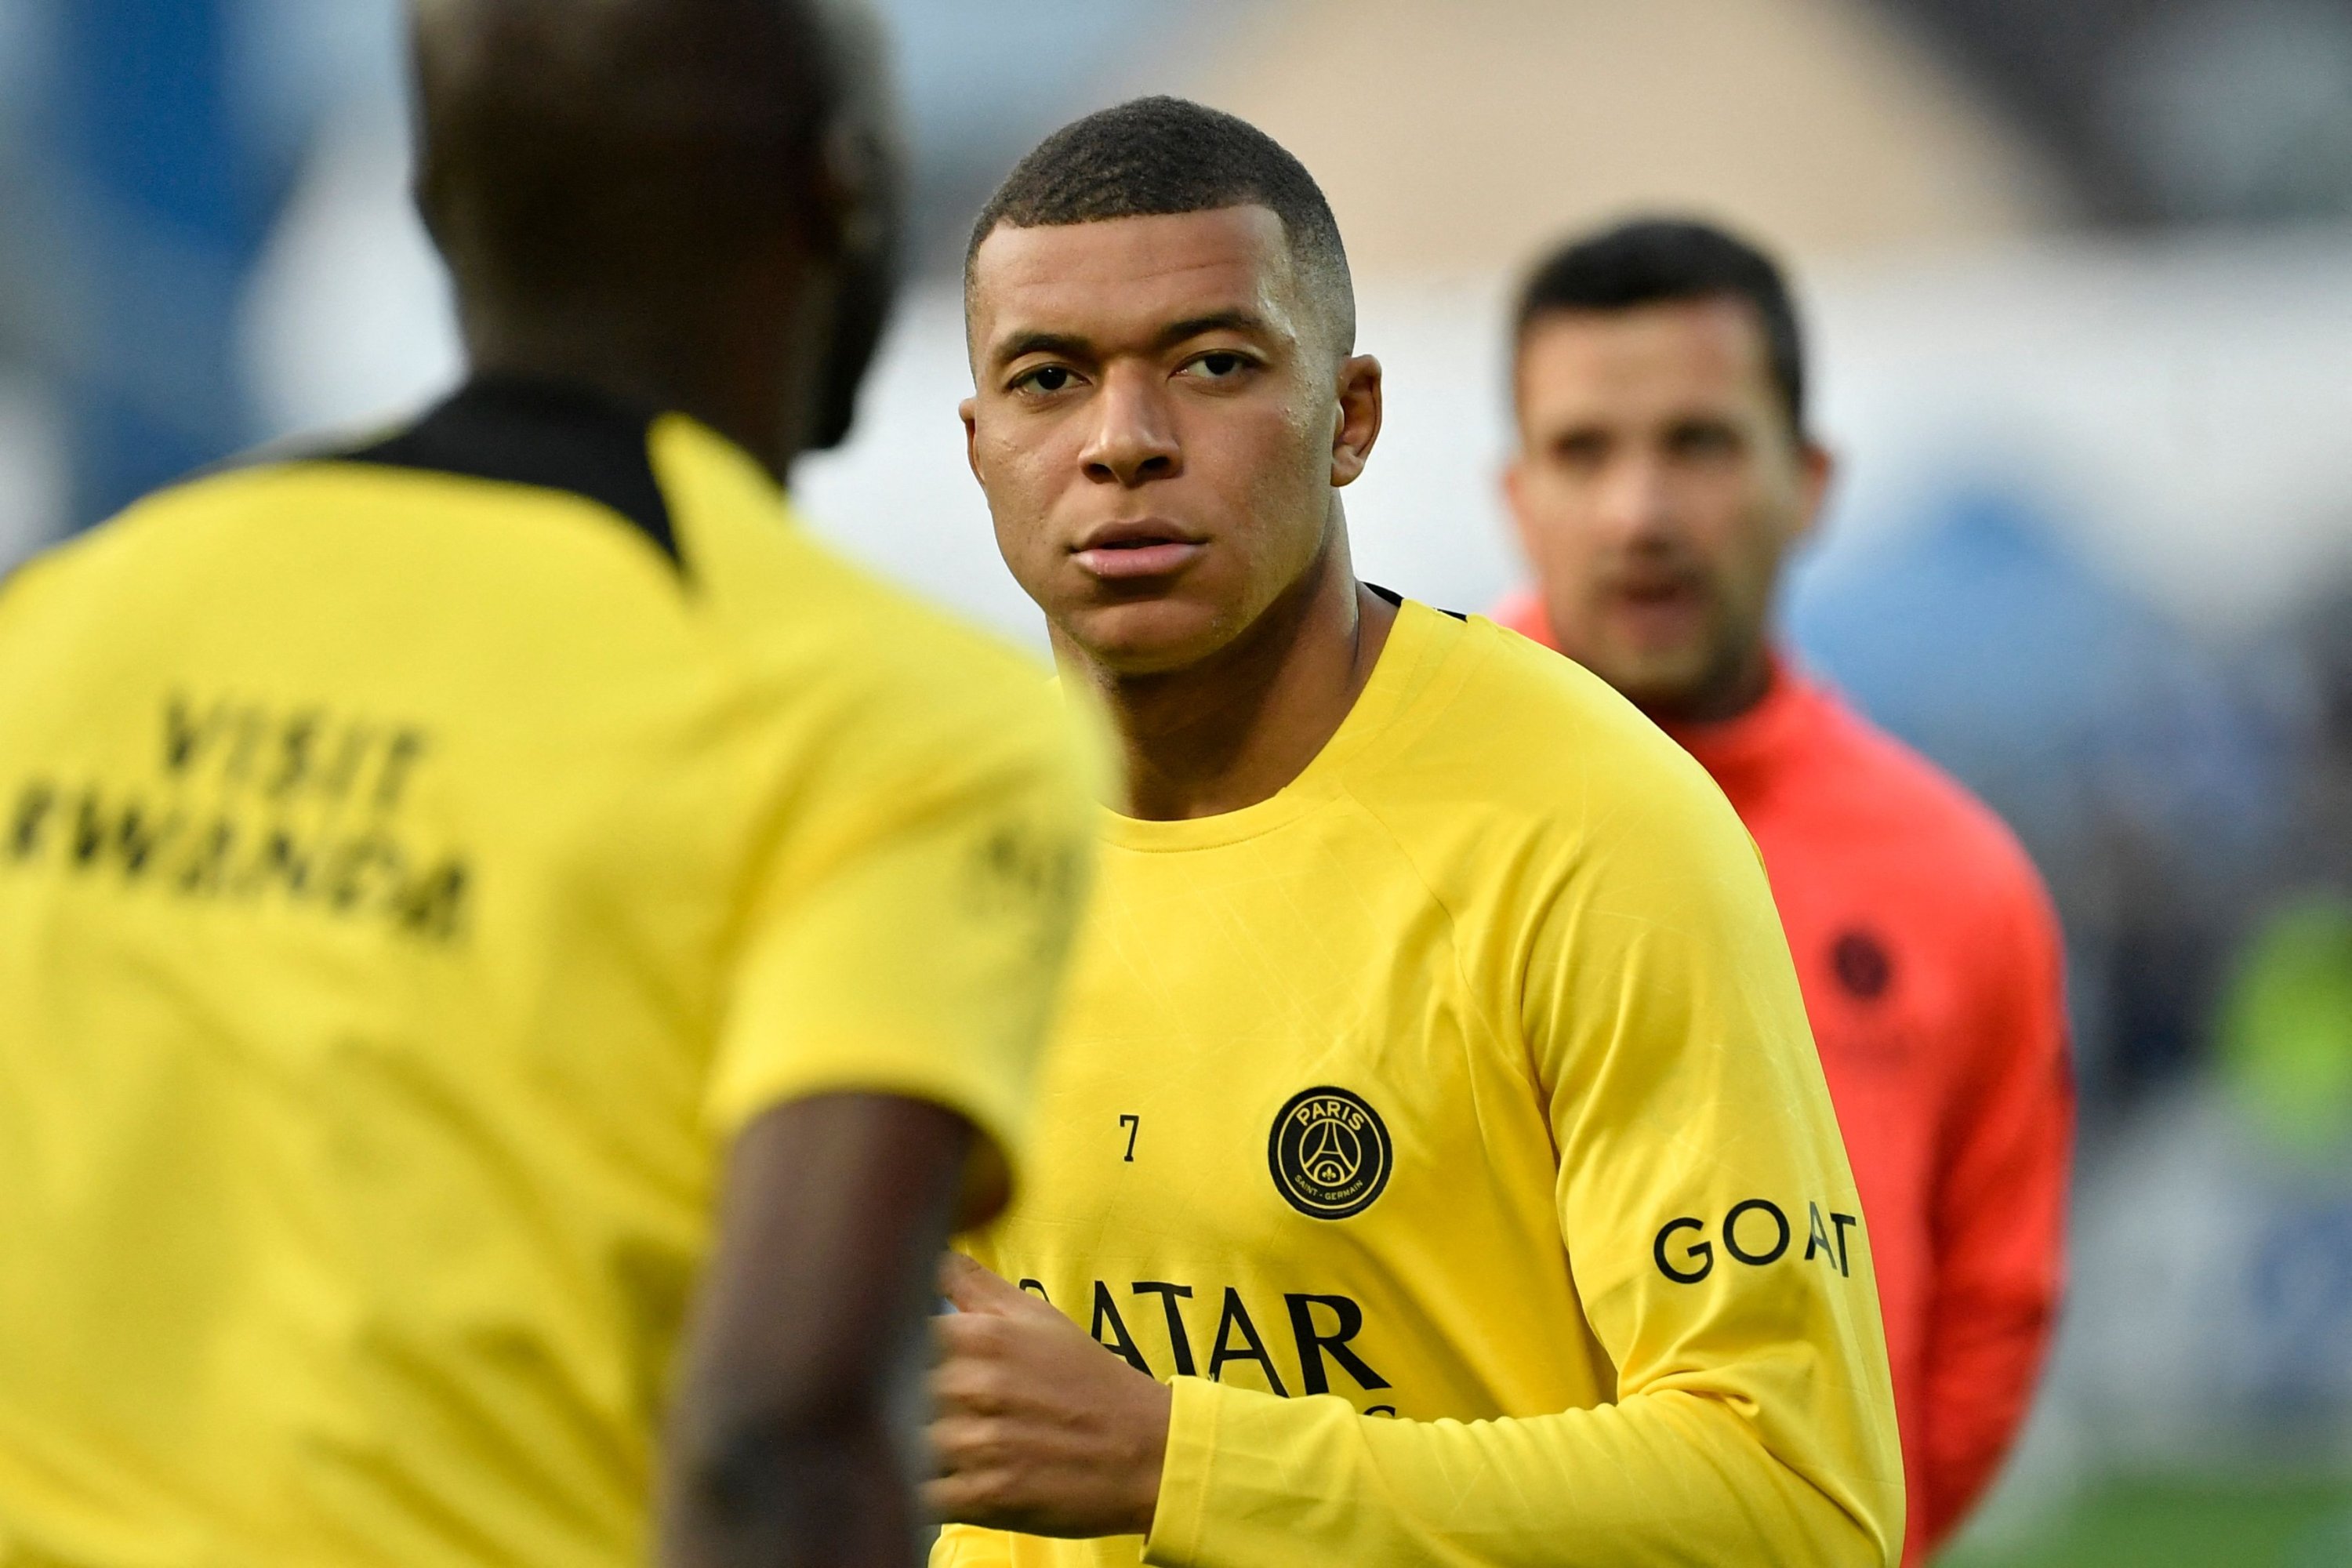 Explained: The Kylian Mbappe Saga – Why Is the Superstar at War